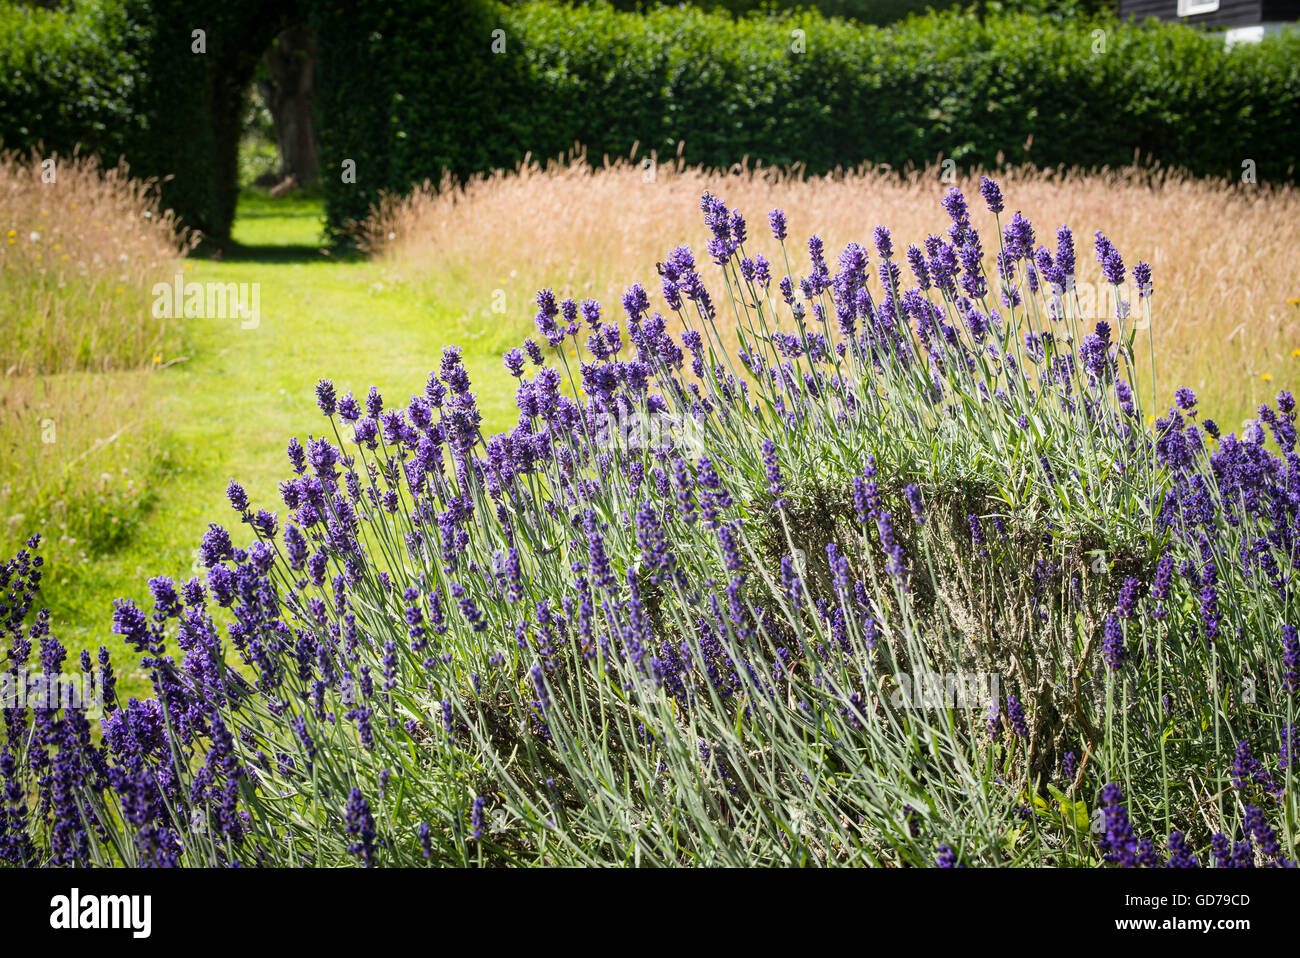 Purple lavender dominating the view of a garden with cut and wild grasses Stock Photo